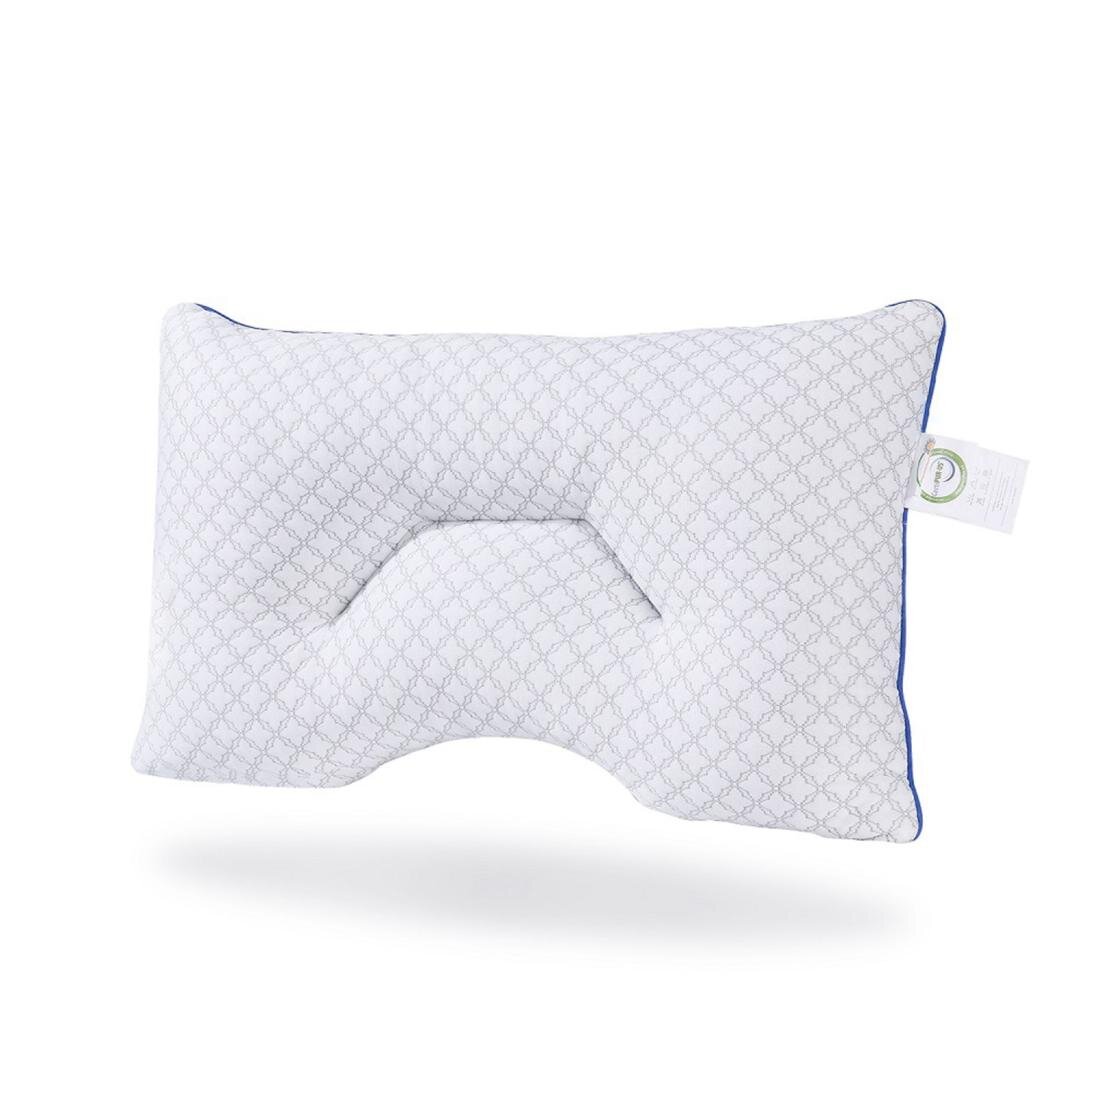 Sleeping On Arm Under Pillow Best For Side And Stomach Sleepers Get Great Neck Support Memory Foam 5 Inch Hight With Cream Velour Cover Better Sleep Pillow Tempur Neck Pillow 